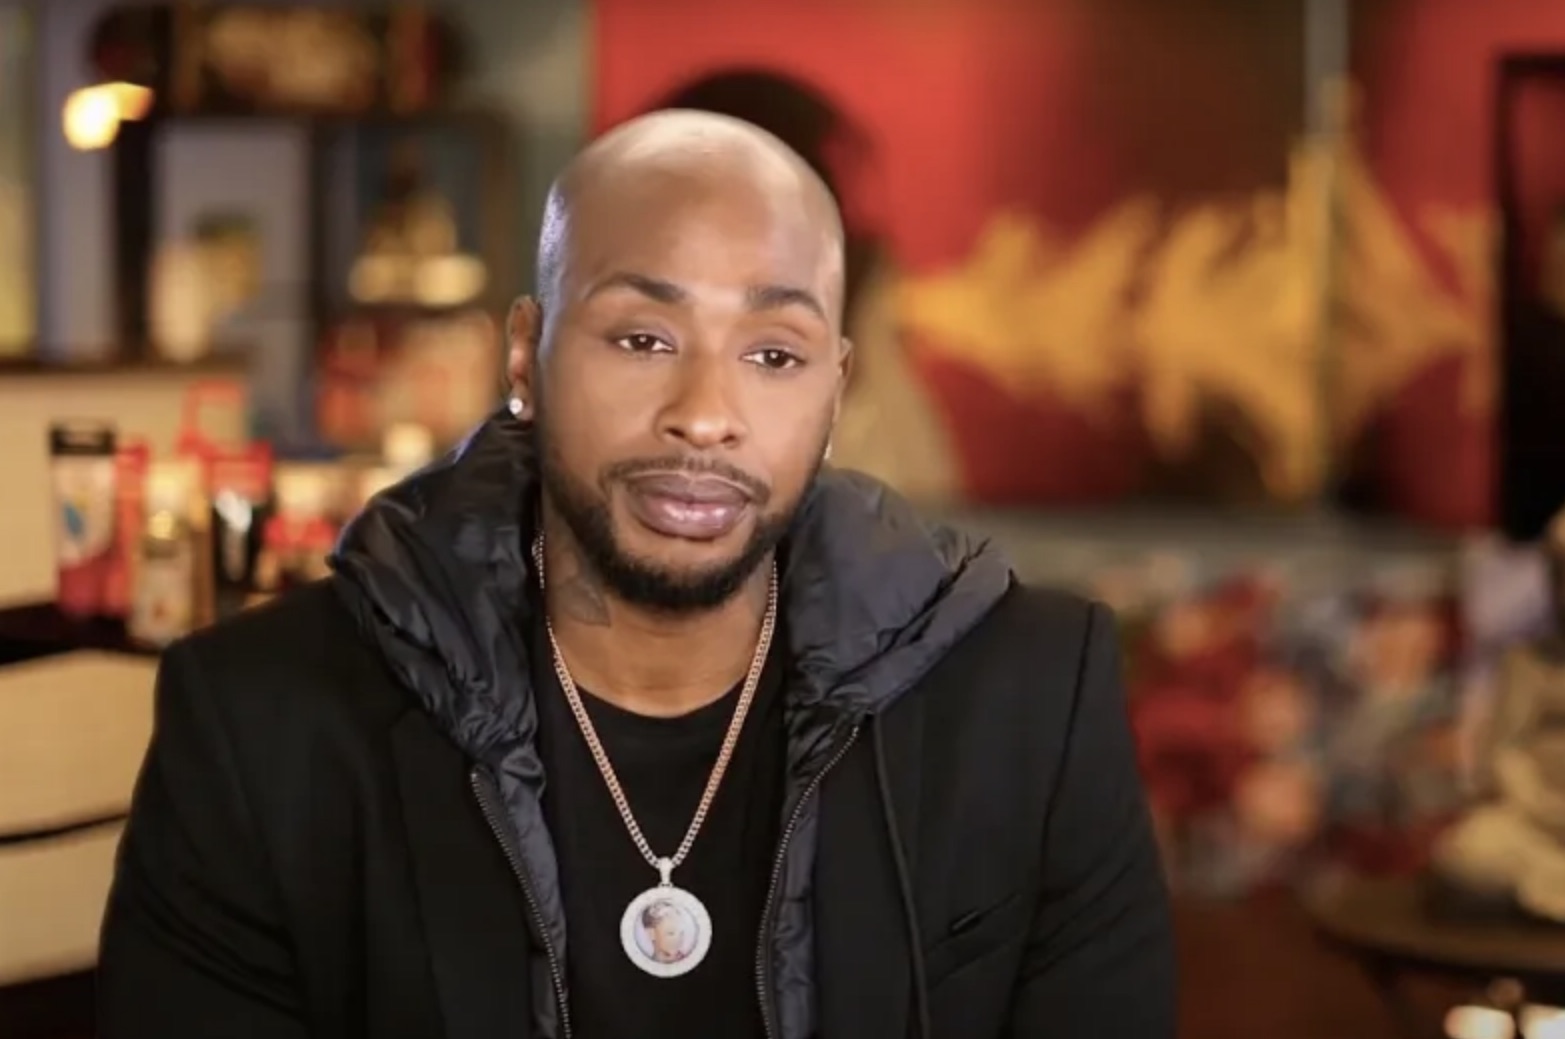 ‘Black Ink Crew’ star Ceaser fired from VH1 after dog abuse video